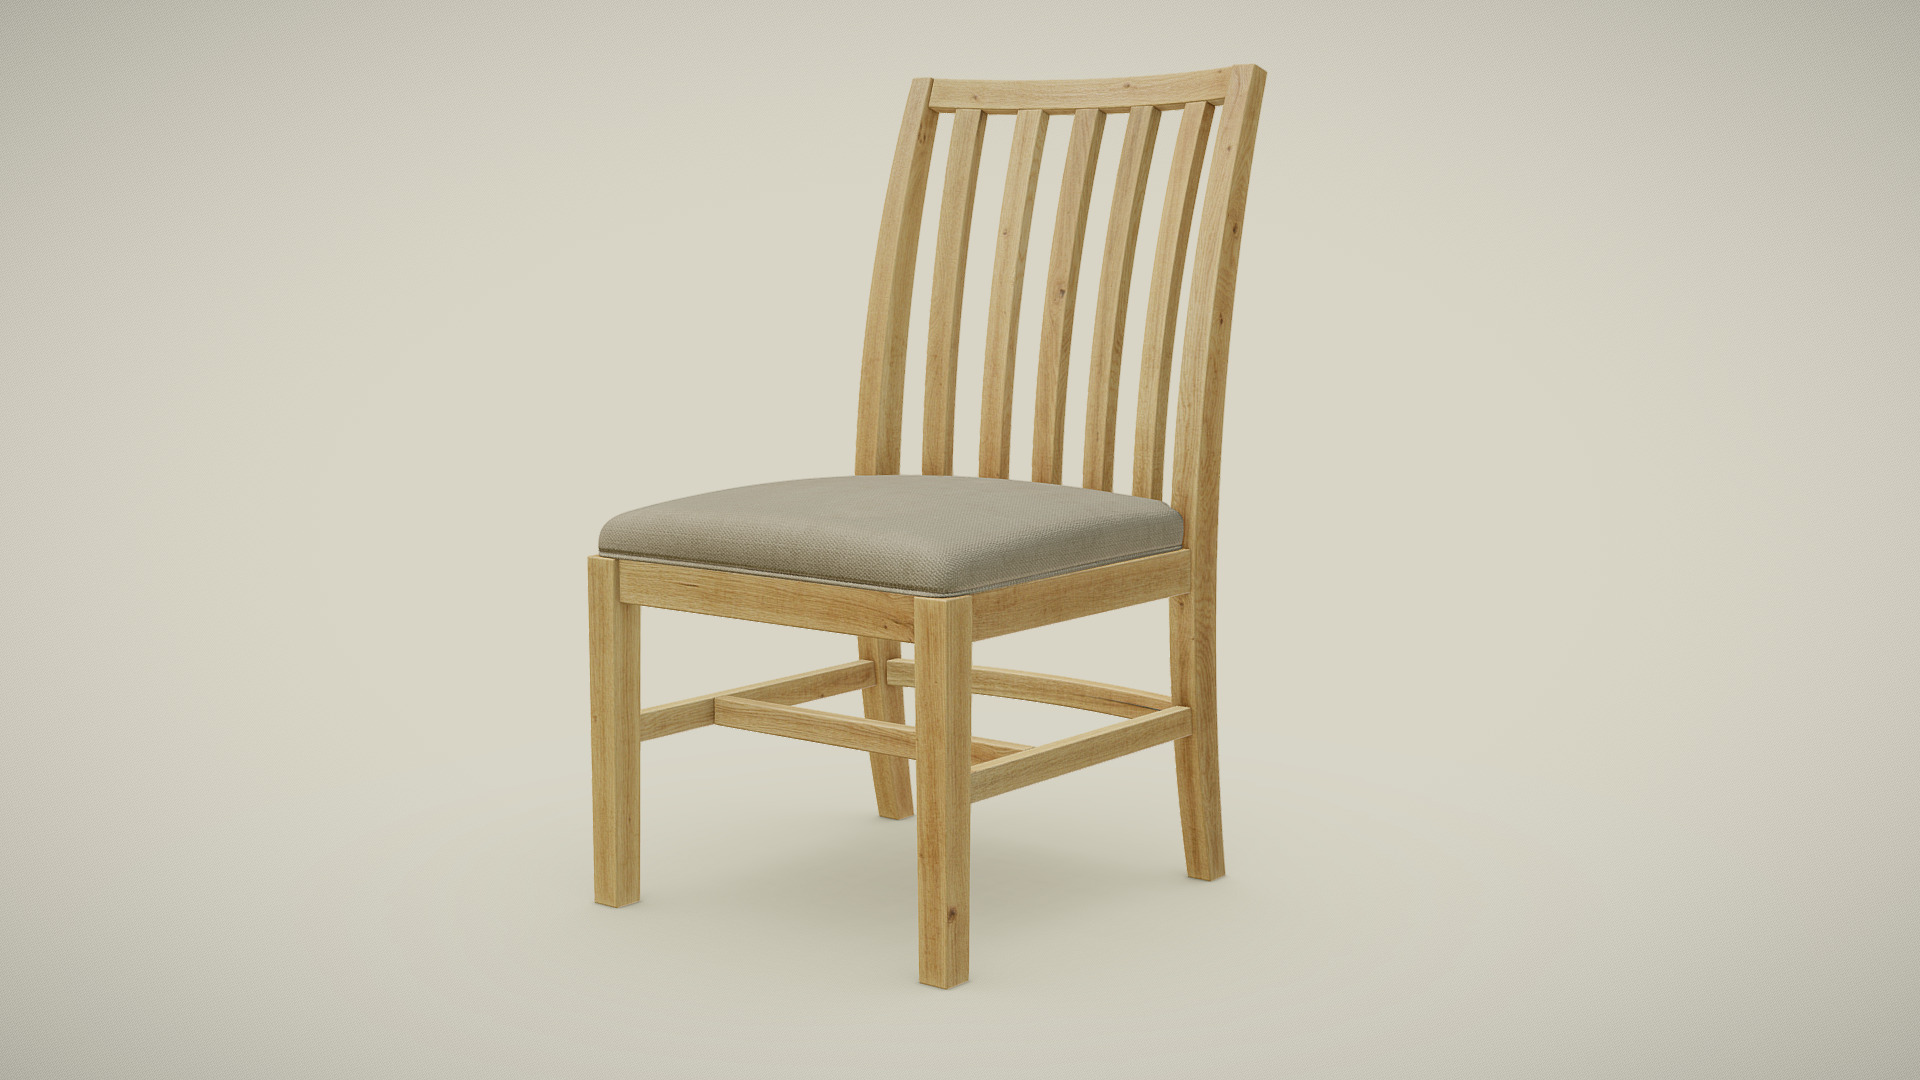 3D model Slat Back Chair - This is a 3D model of the Slat Back Chair. The 3D model is about a wooden chair against a white background.